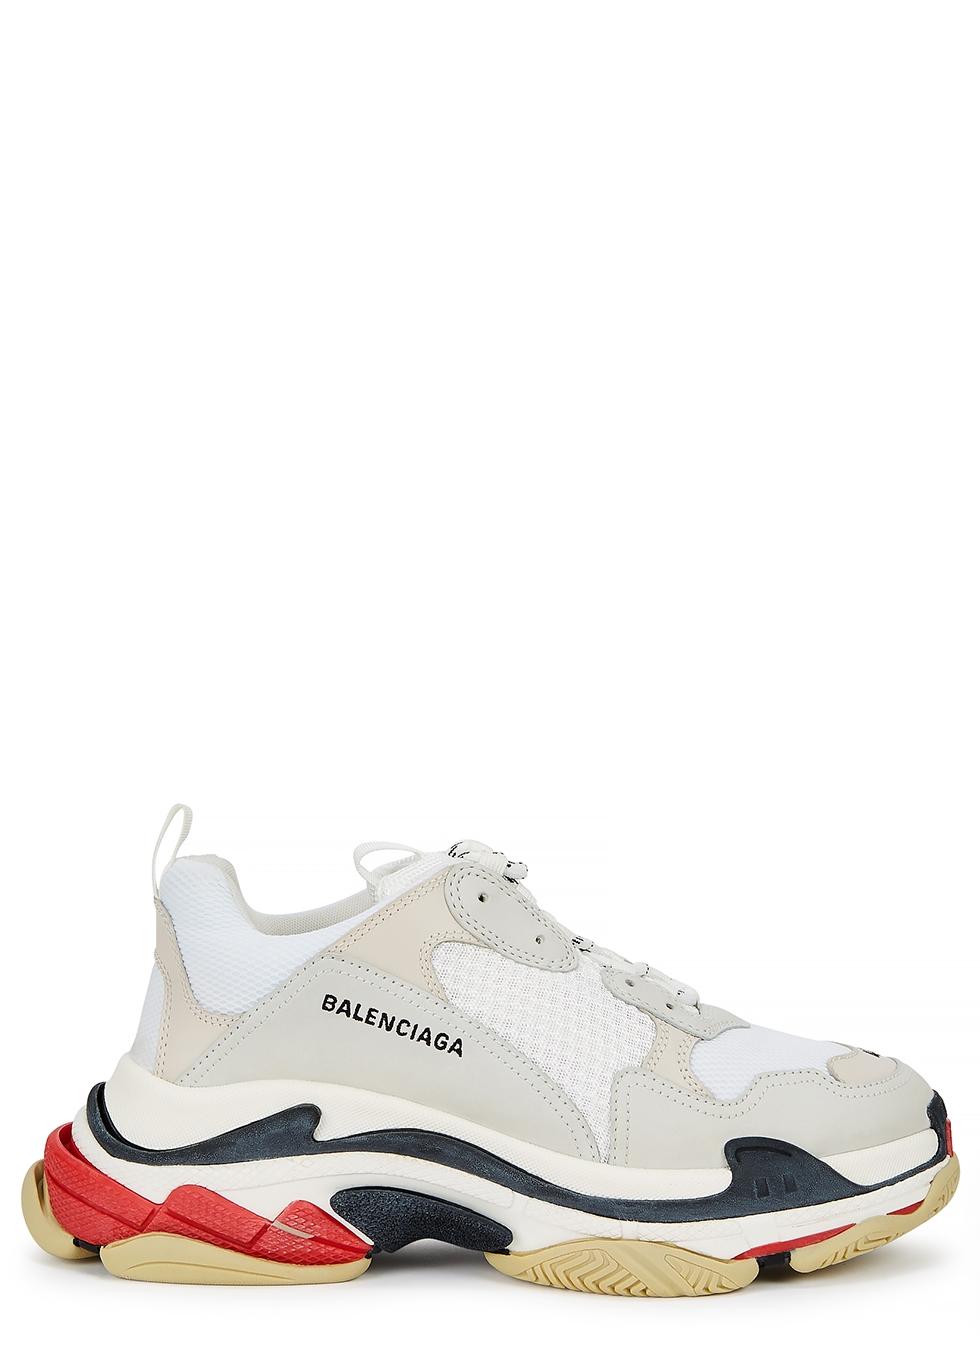 Order Balenciaga Triple S Trainers Jaune Fluo sneakers online